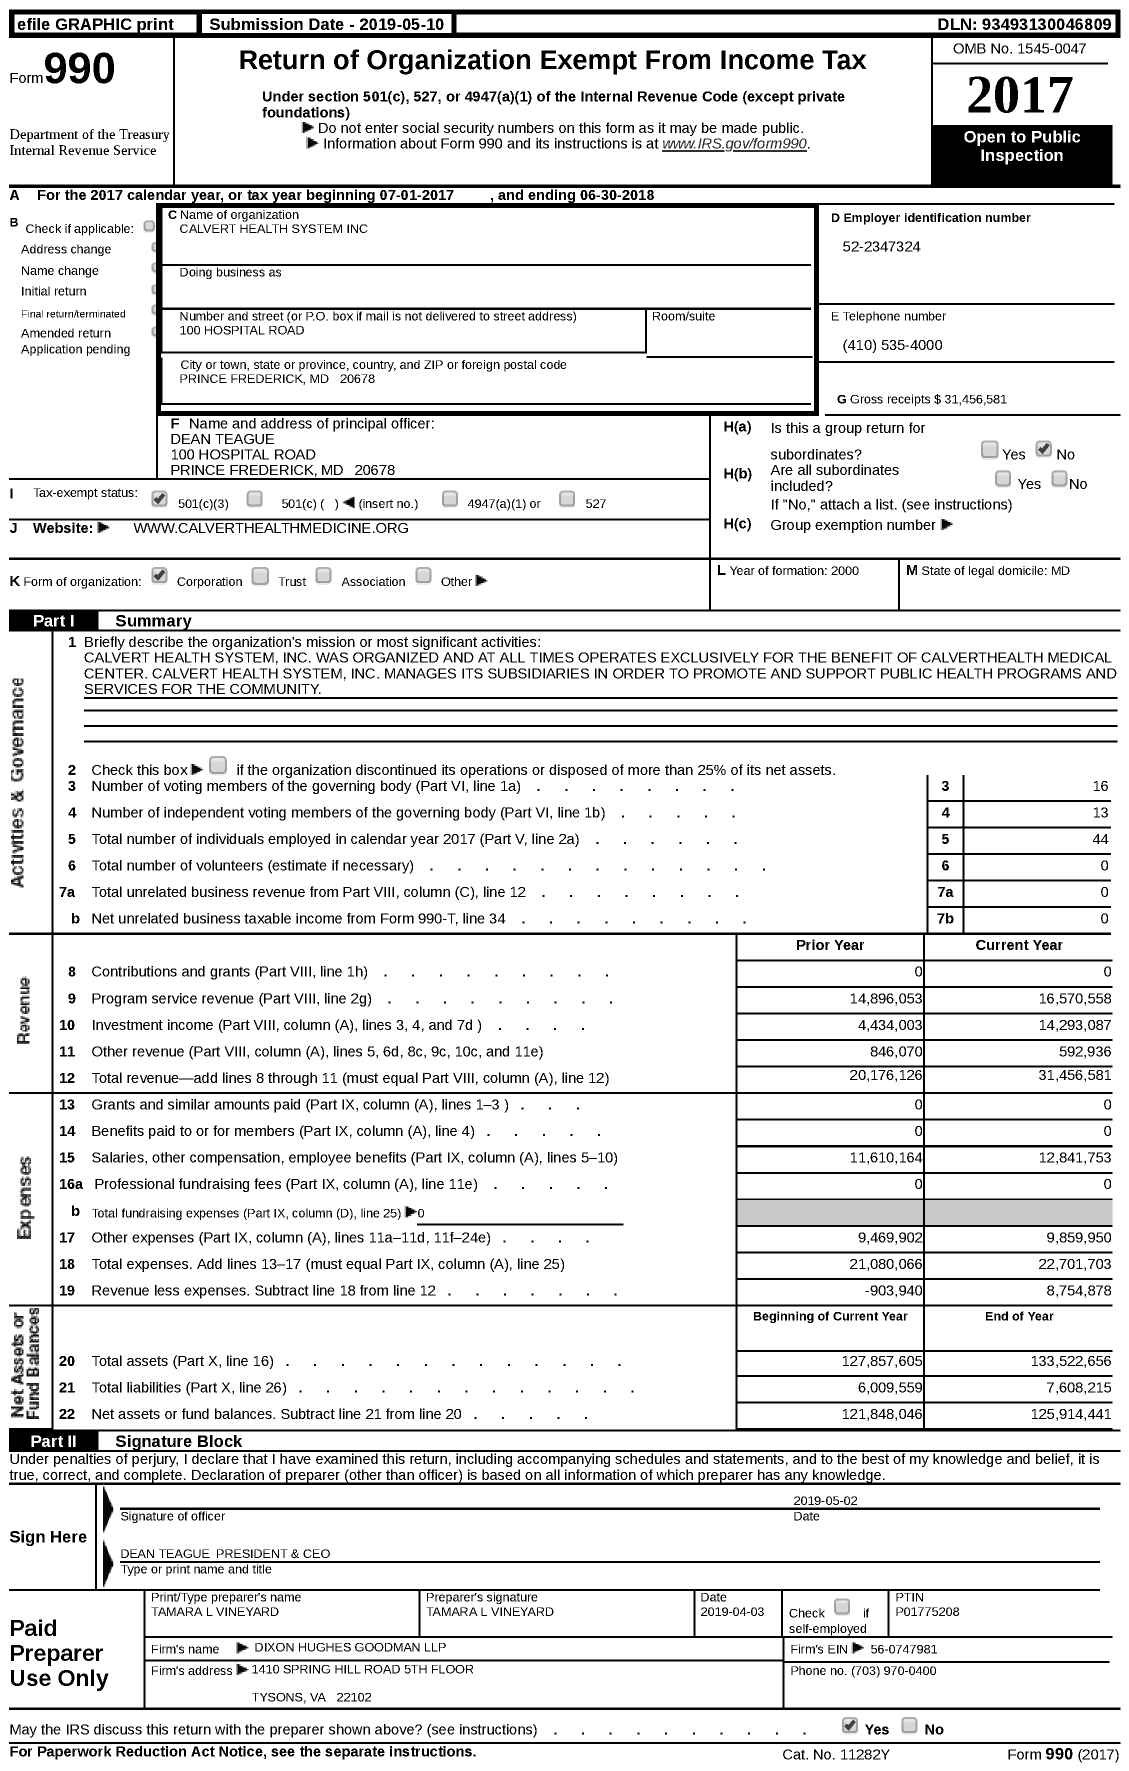 Image of first page of 2017 Form 990 for Calvert Health System (CHS)